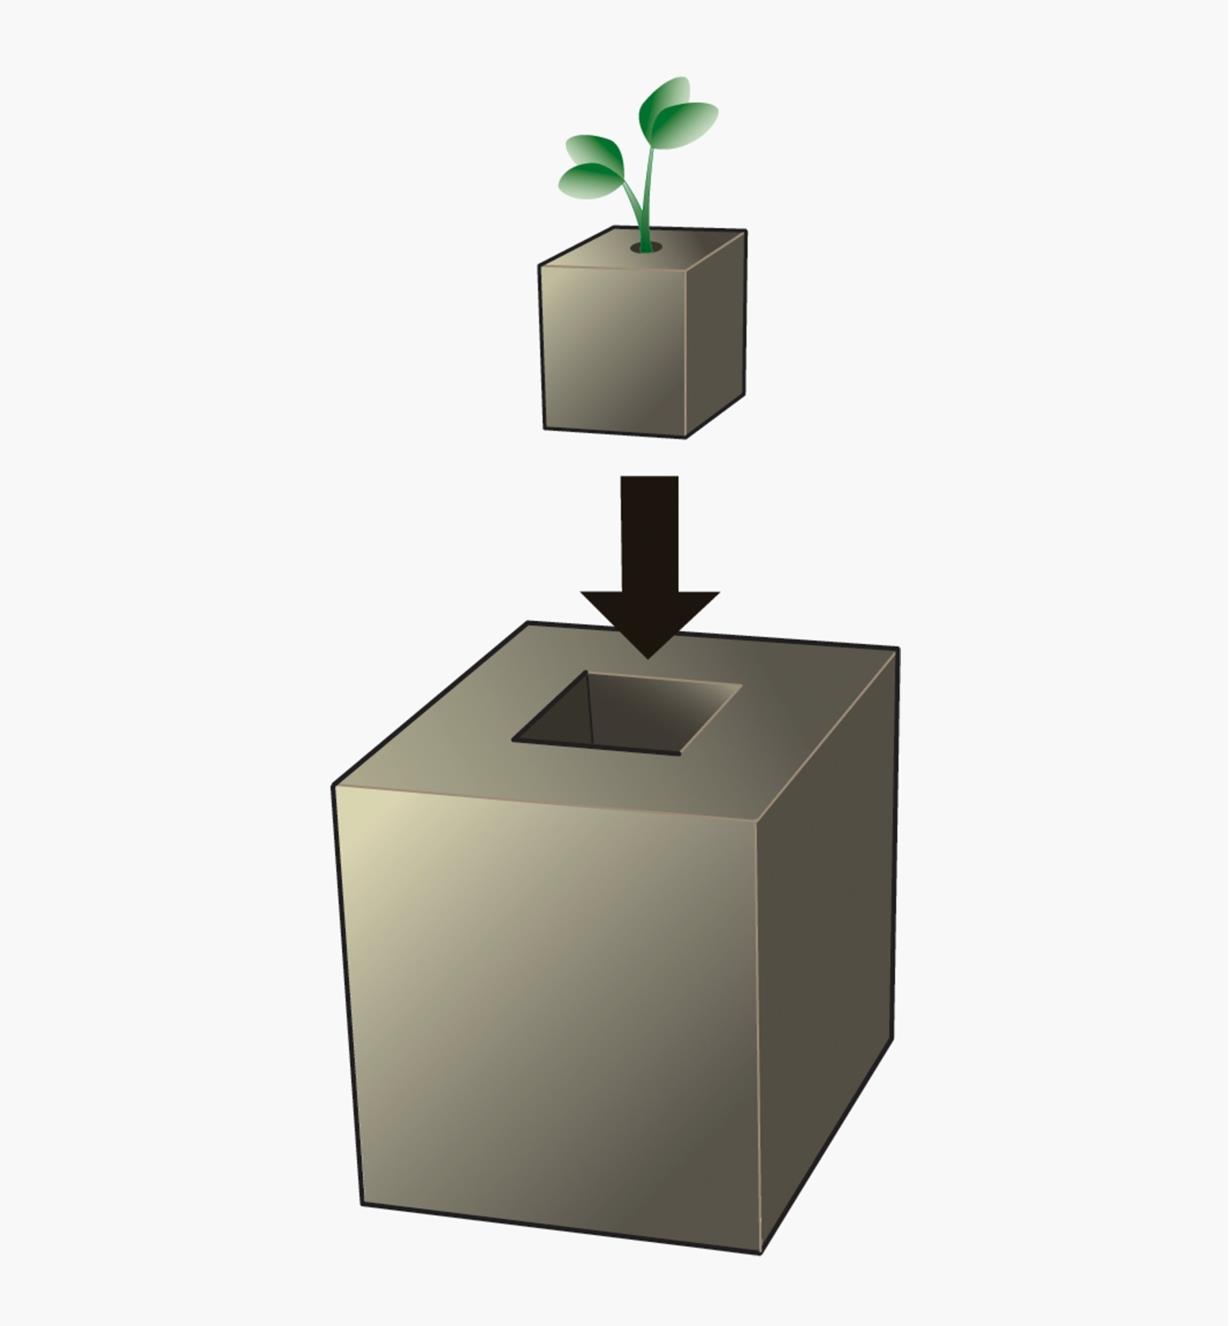 An illustration showing how to insert a small soil cube into a large soil block